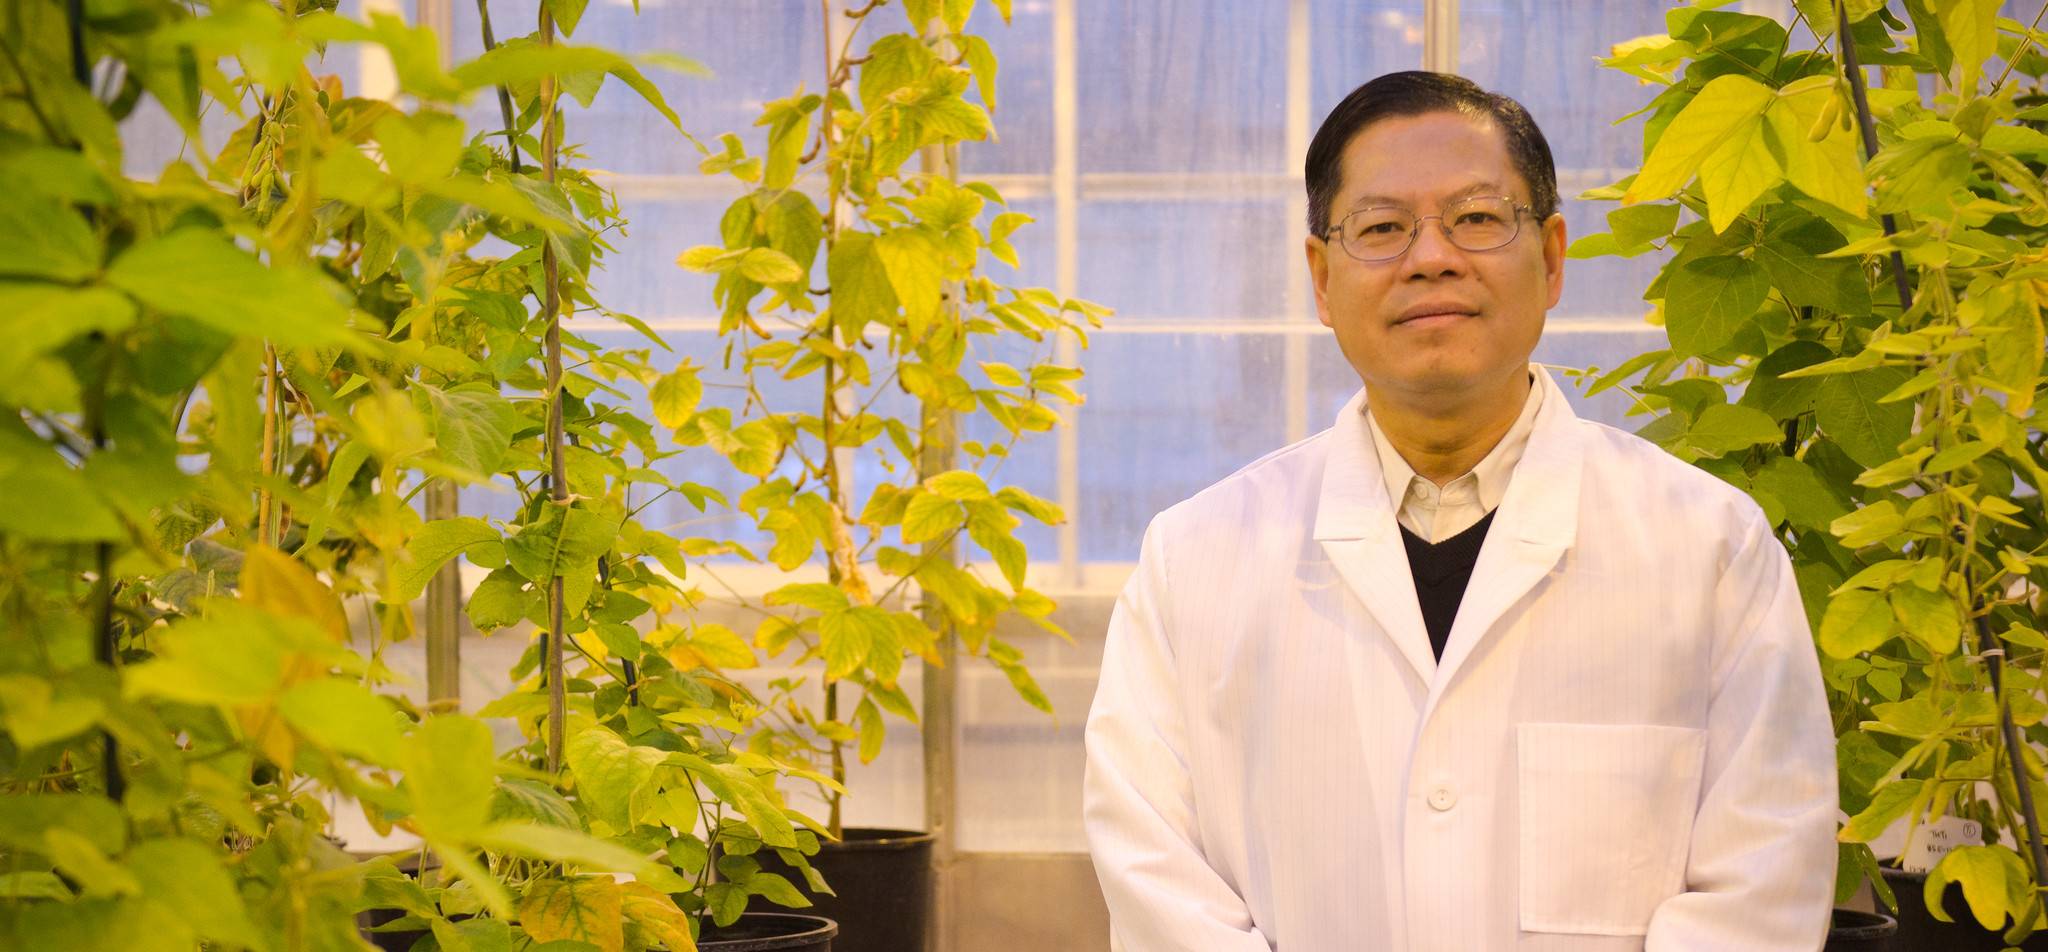 Henry Nguyen Named Editor of The Plant Genome (click to read)